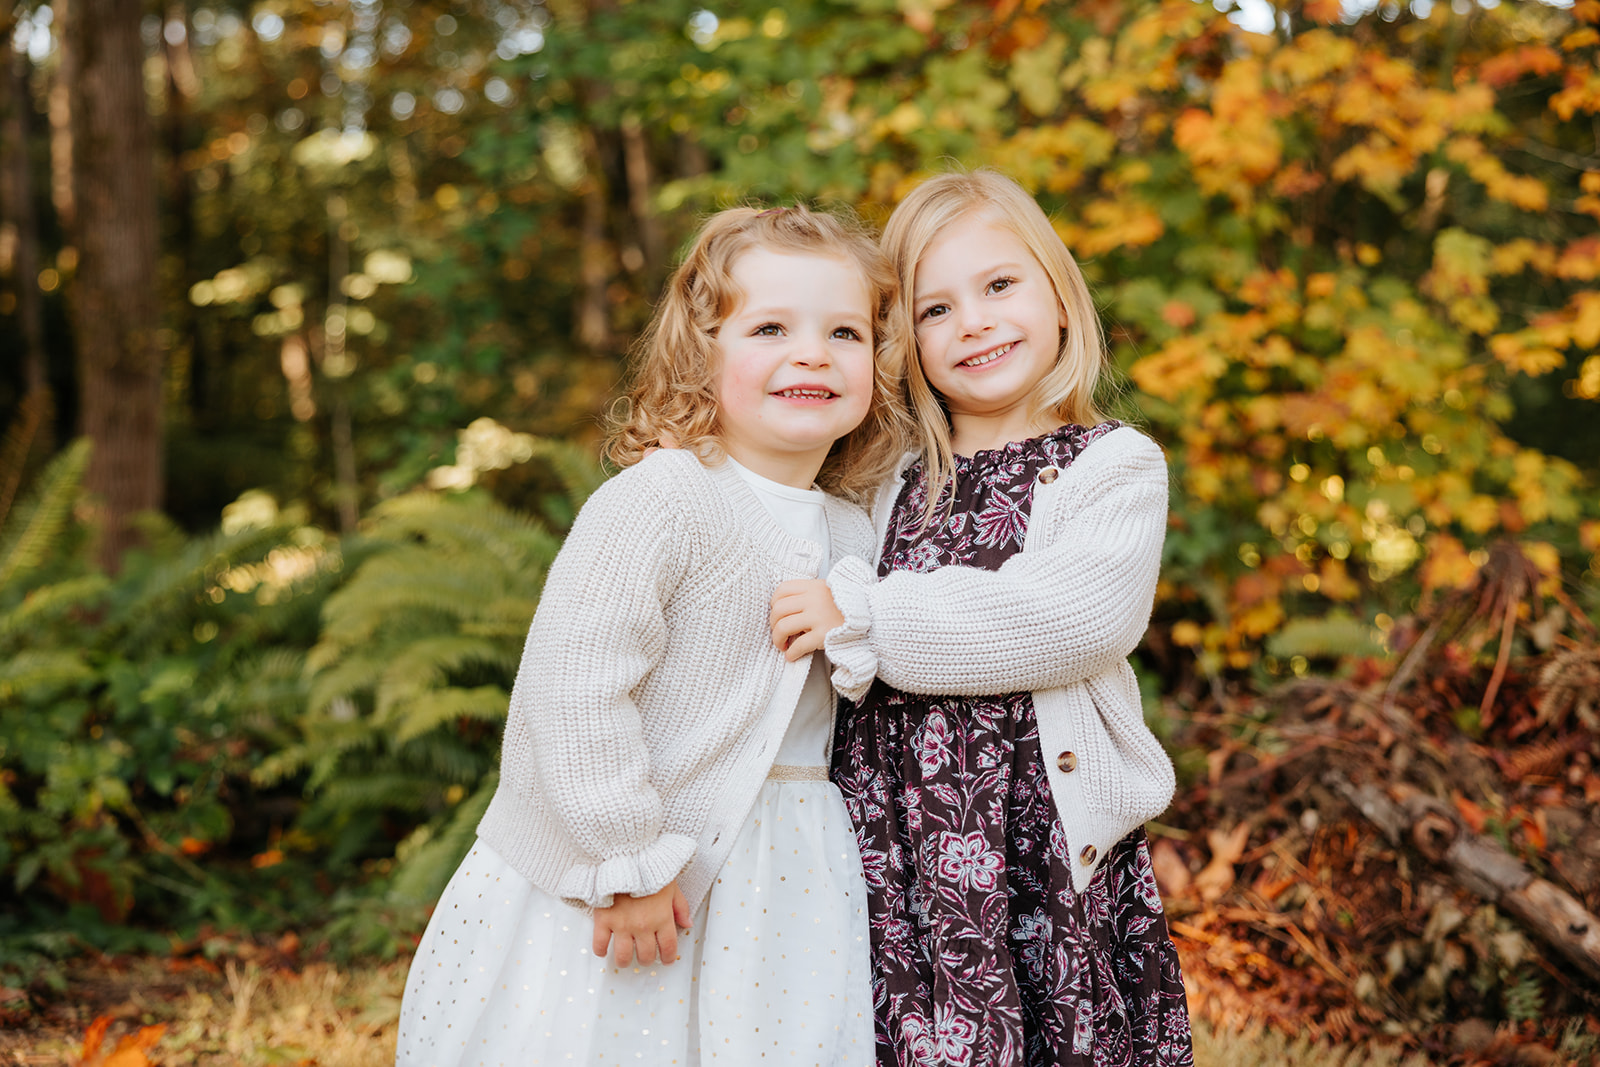 A close-up photo of two young girls hugging each other and smiling at the camera in front of colorful fall foliage.